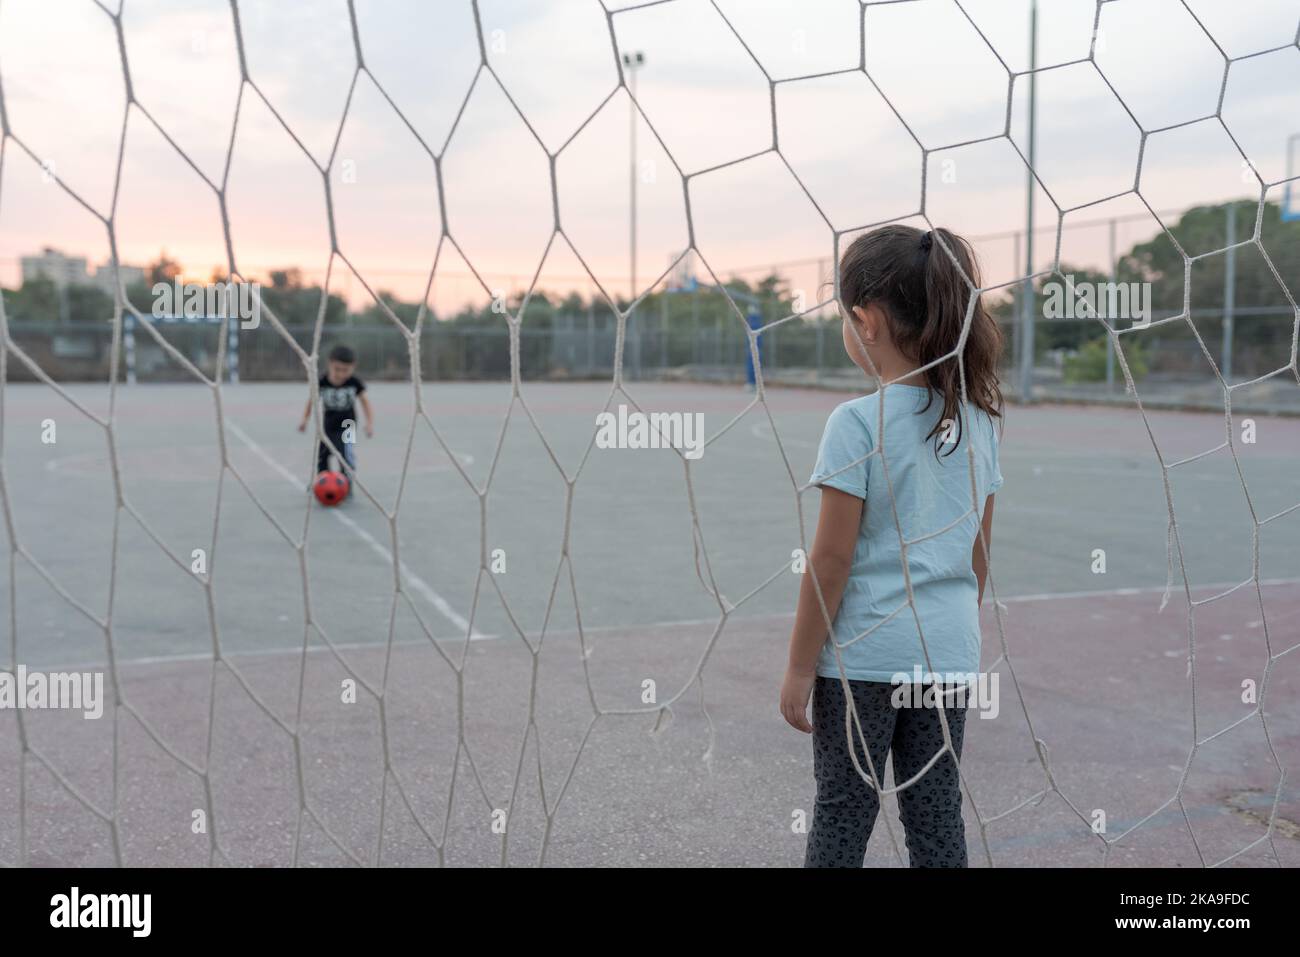 Back view of child goalkeeper ready to catch a soccer ball stand on soccer field in football goal. Selective focus on girl. Stock Photo